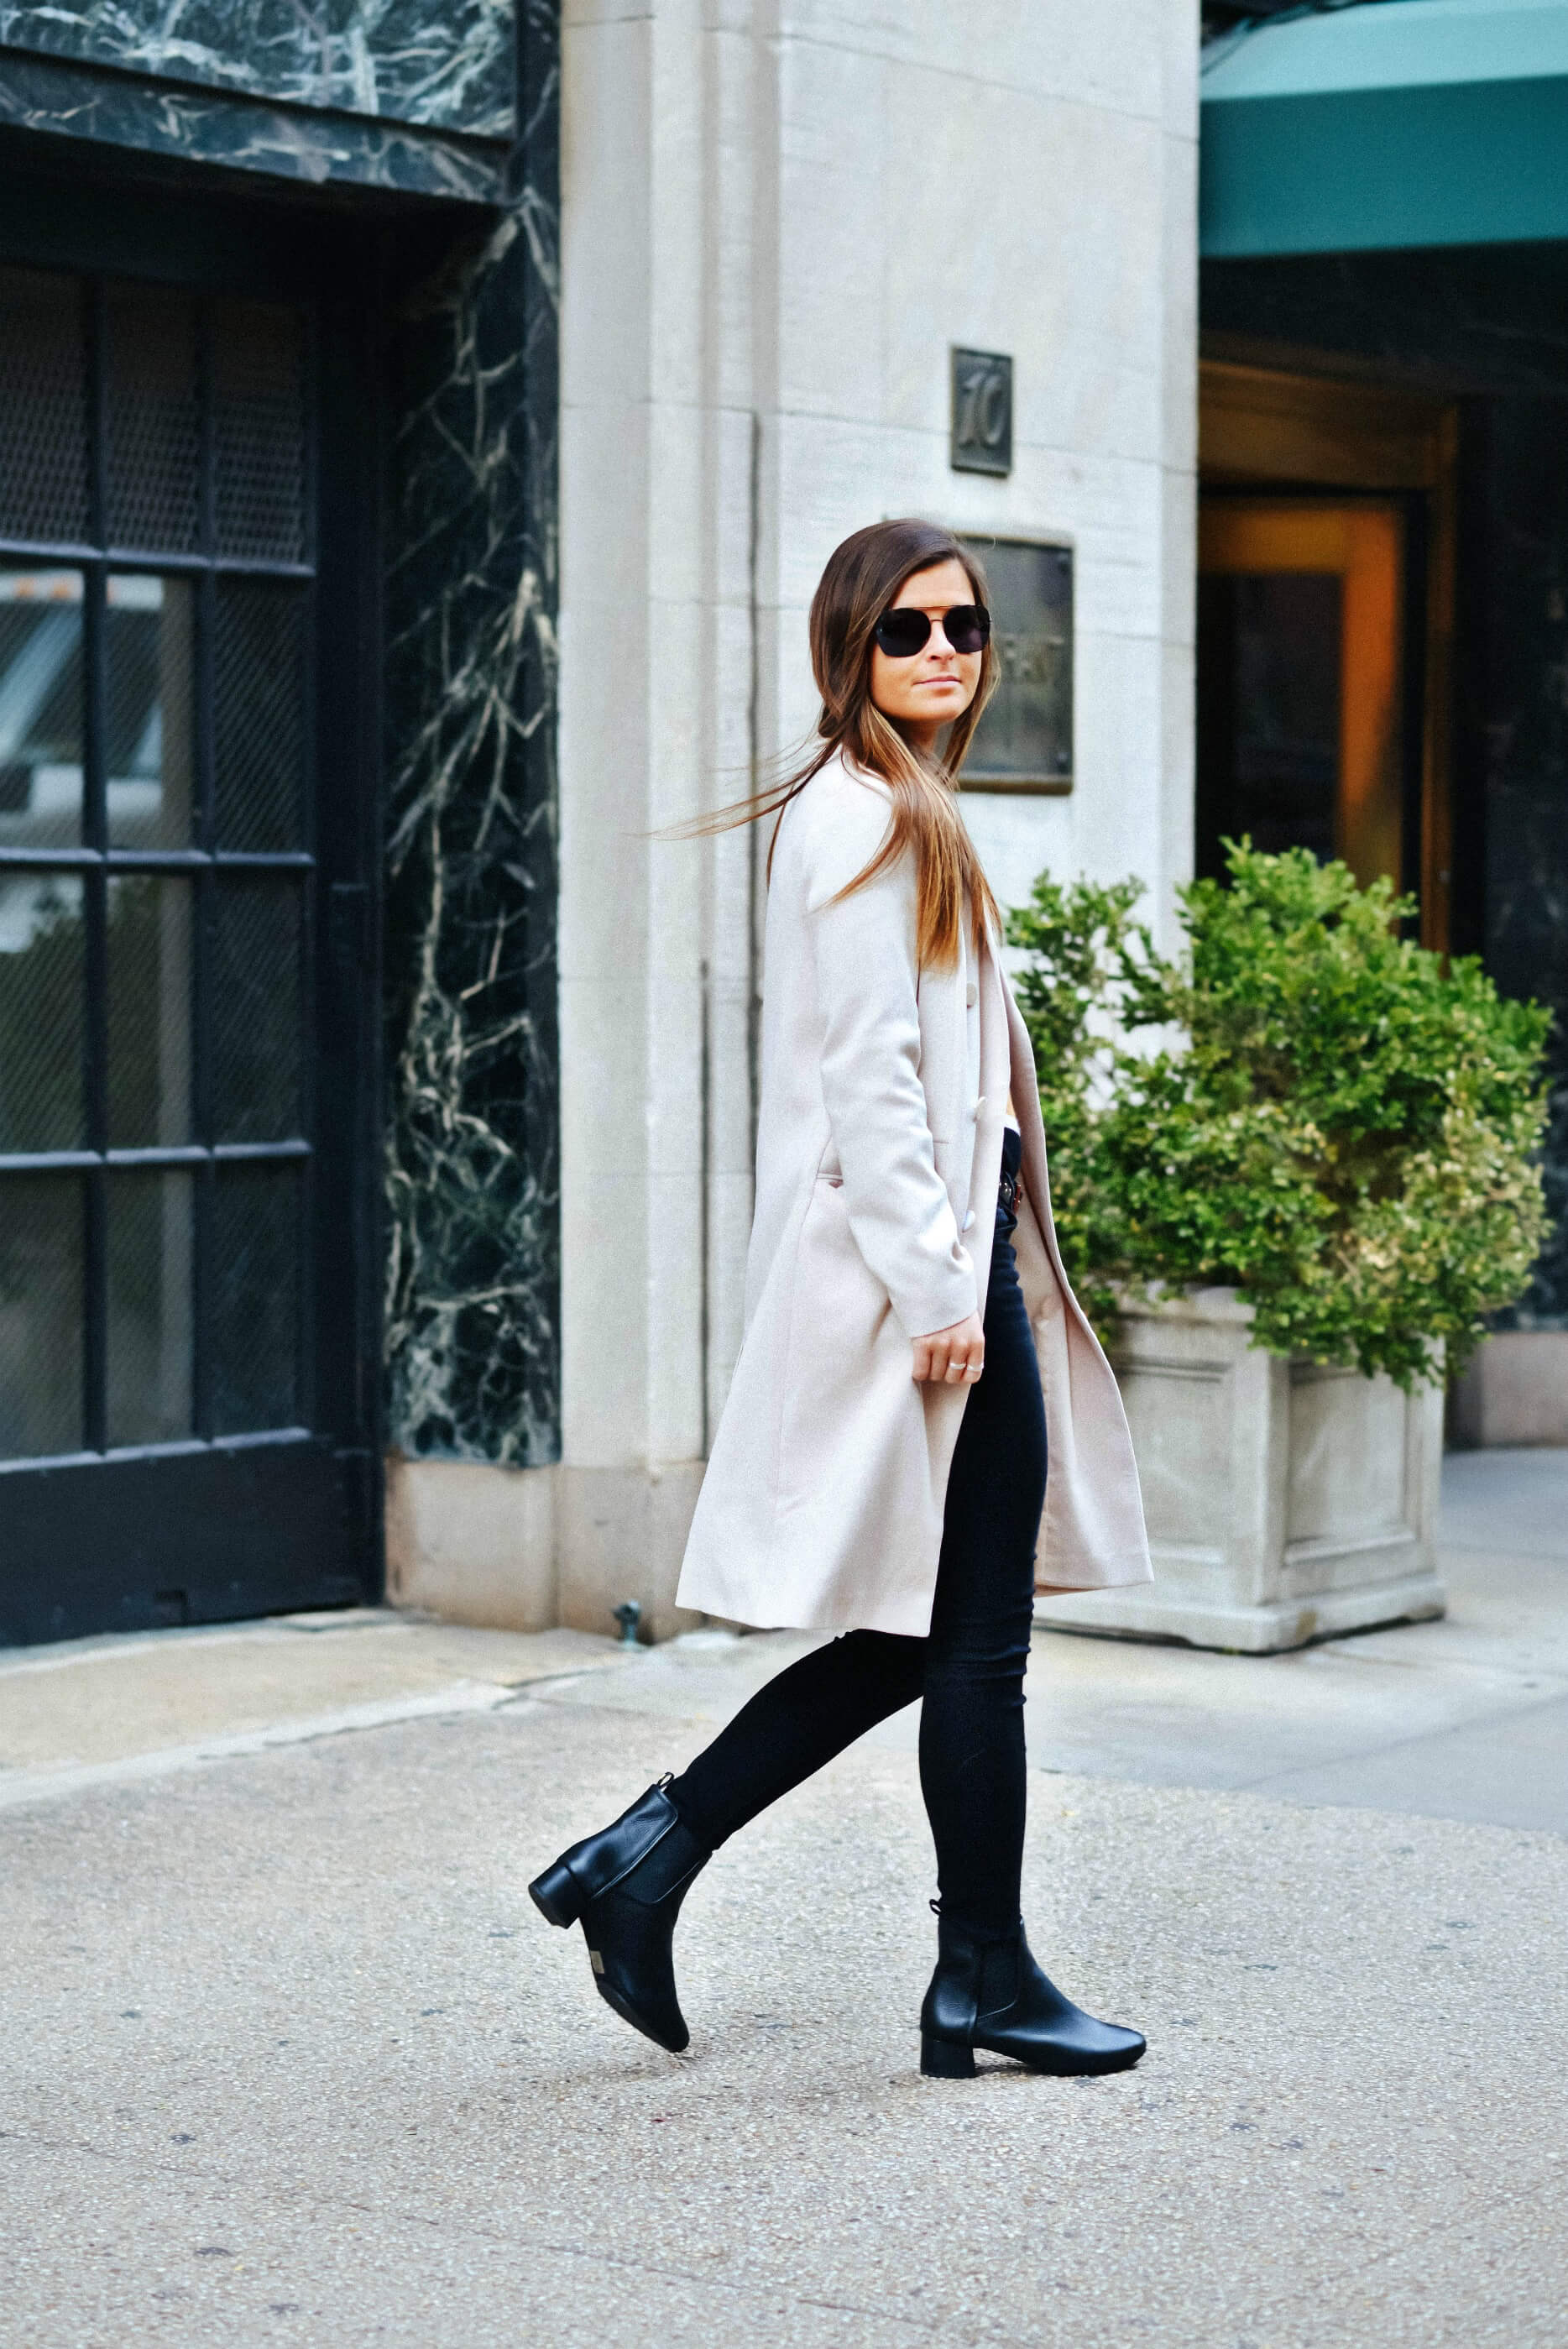 Fall Outfit Inspiration, Duster Coat, Black Jeans, Black Chelsea Boots, Tilden of To Be Bright